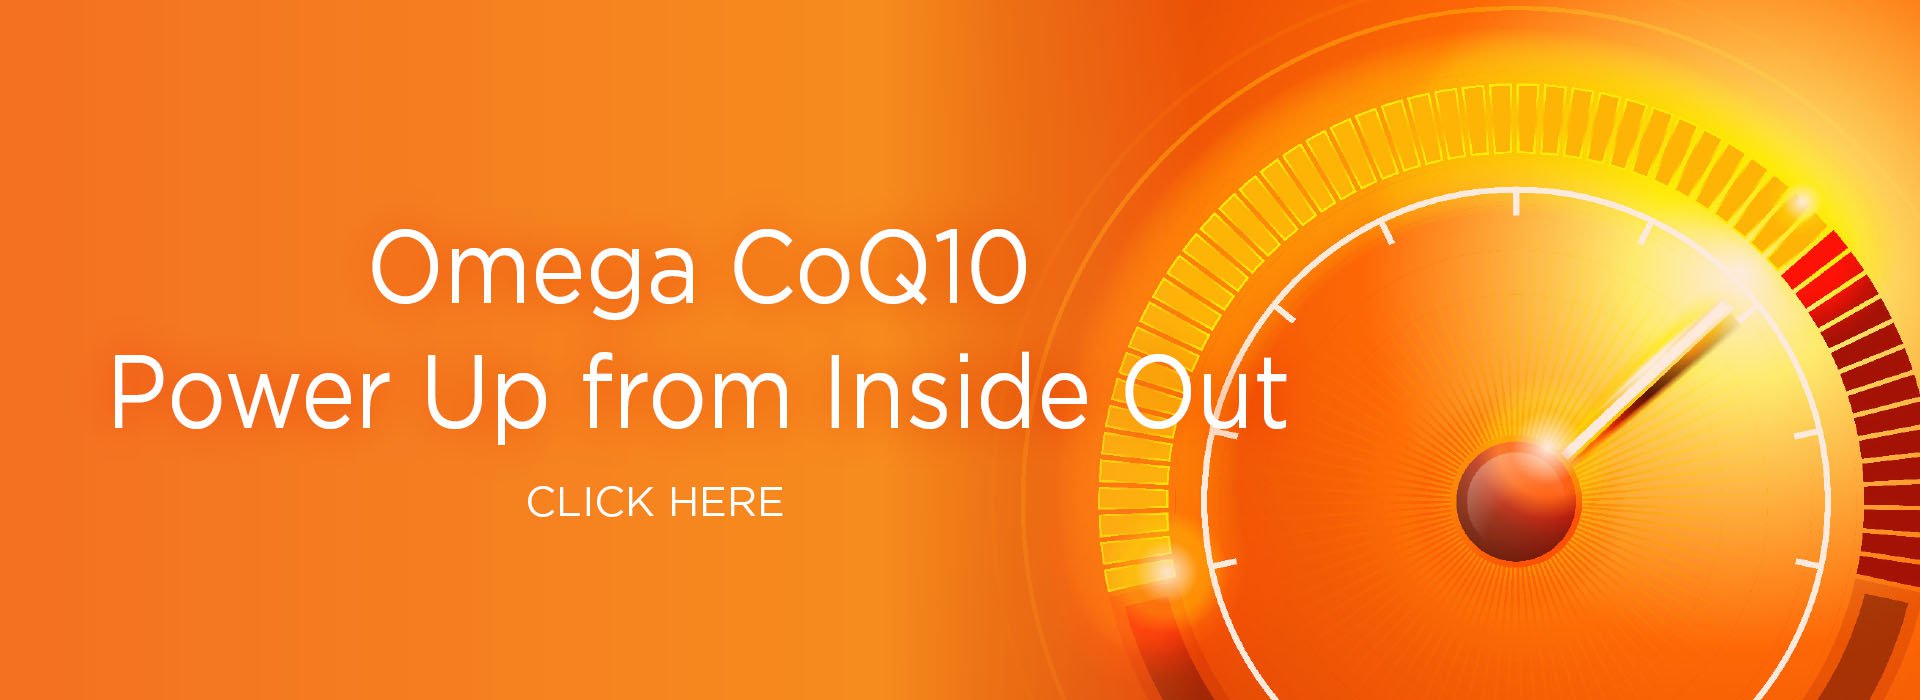 New Image International: Omega CoQ10 Power Up from Inside Out